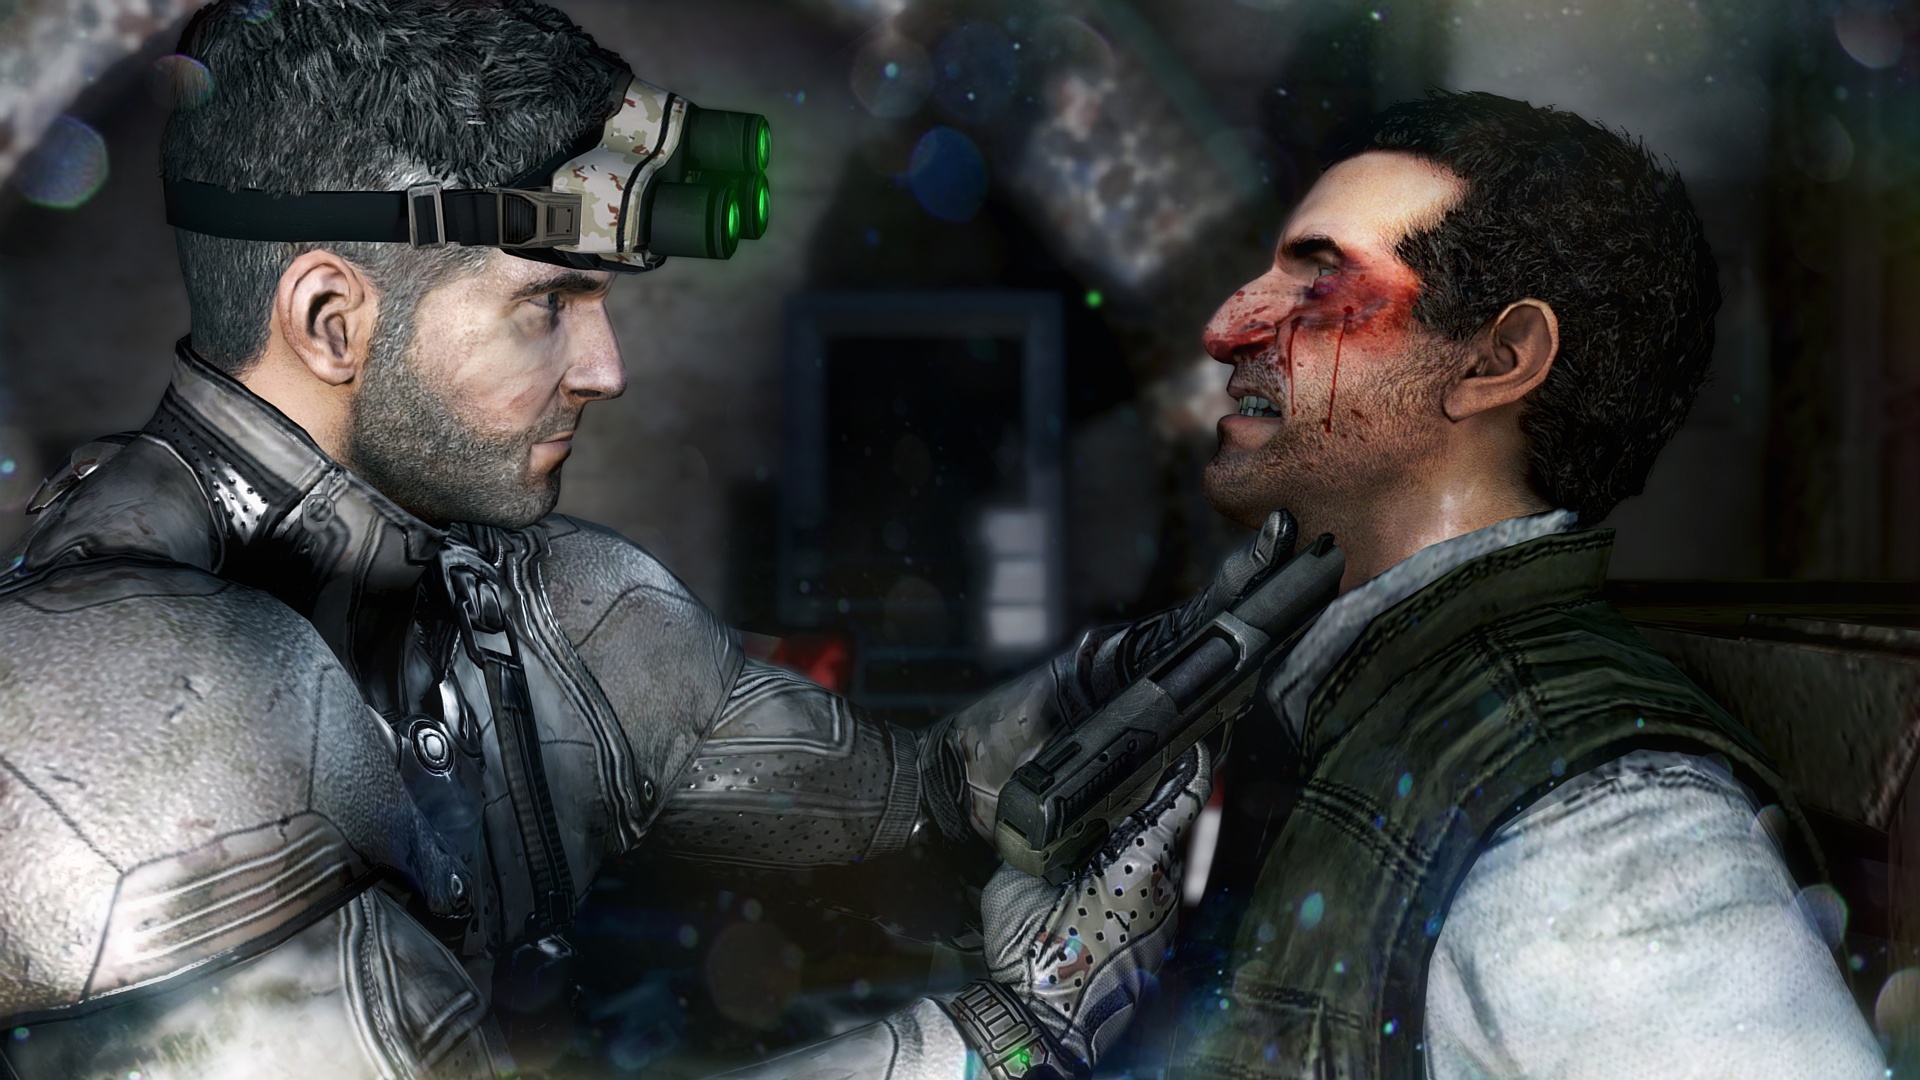 Splinter Cell Blacklist - The 5th Freedom Silver Edition Revealed pic 4